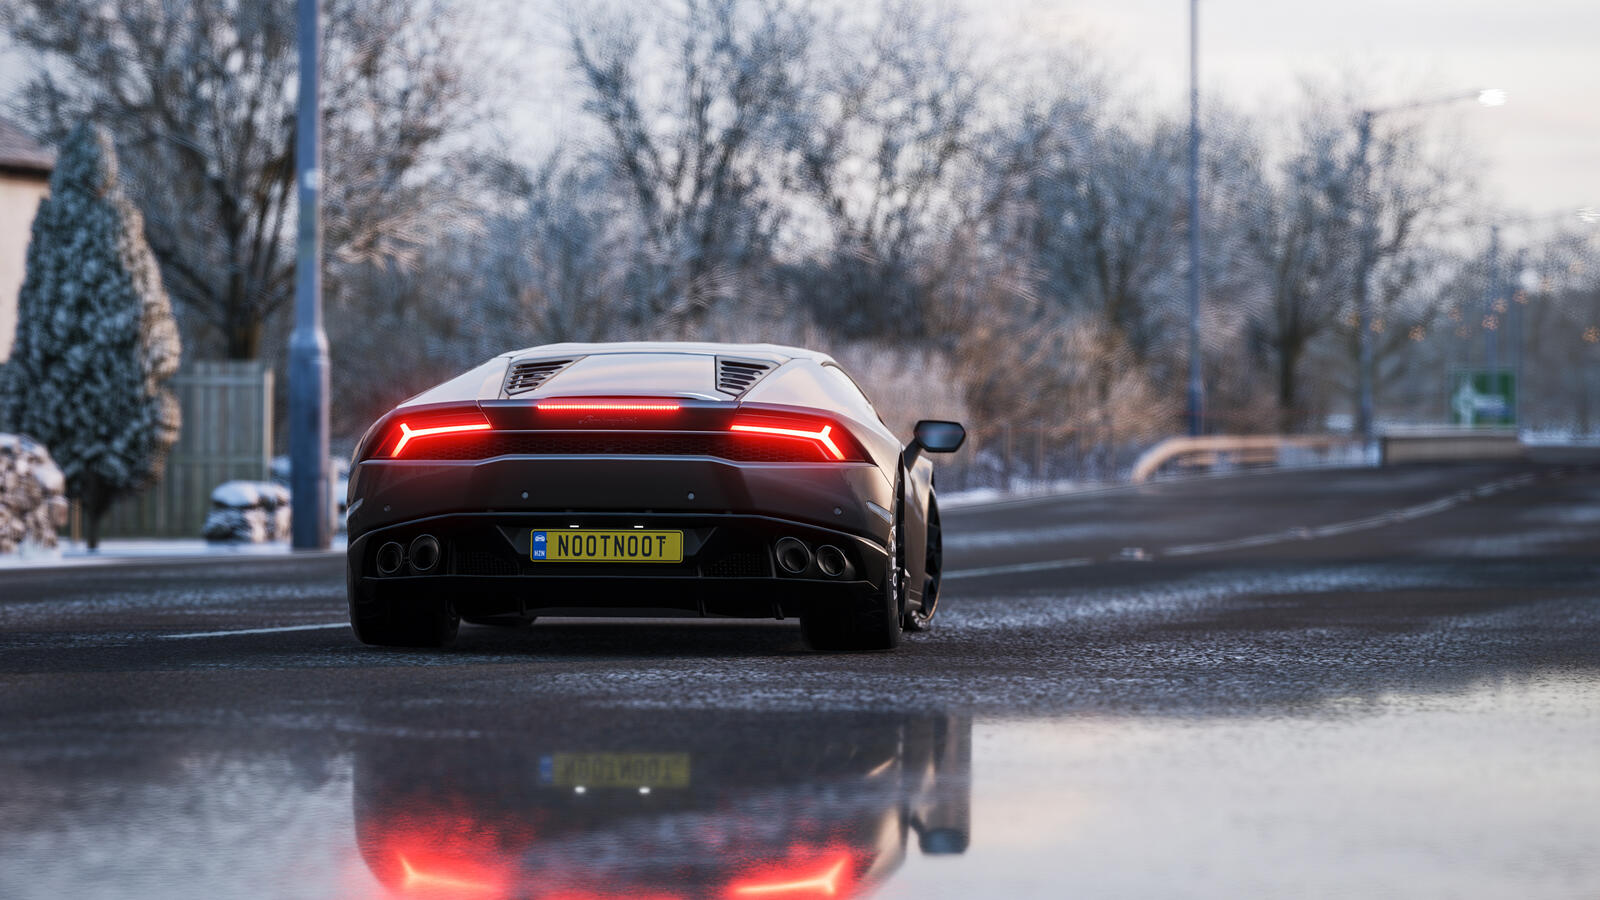 Wallpapers Forza Horizon 4 Forza the 2018 Games on the desktop